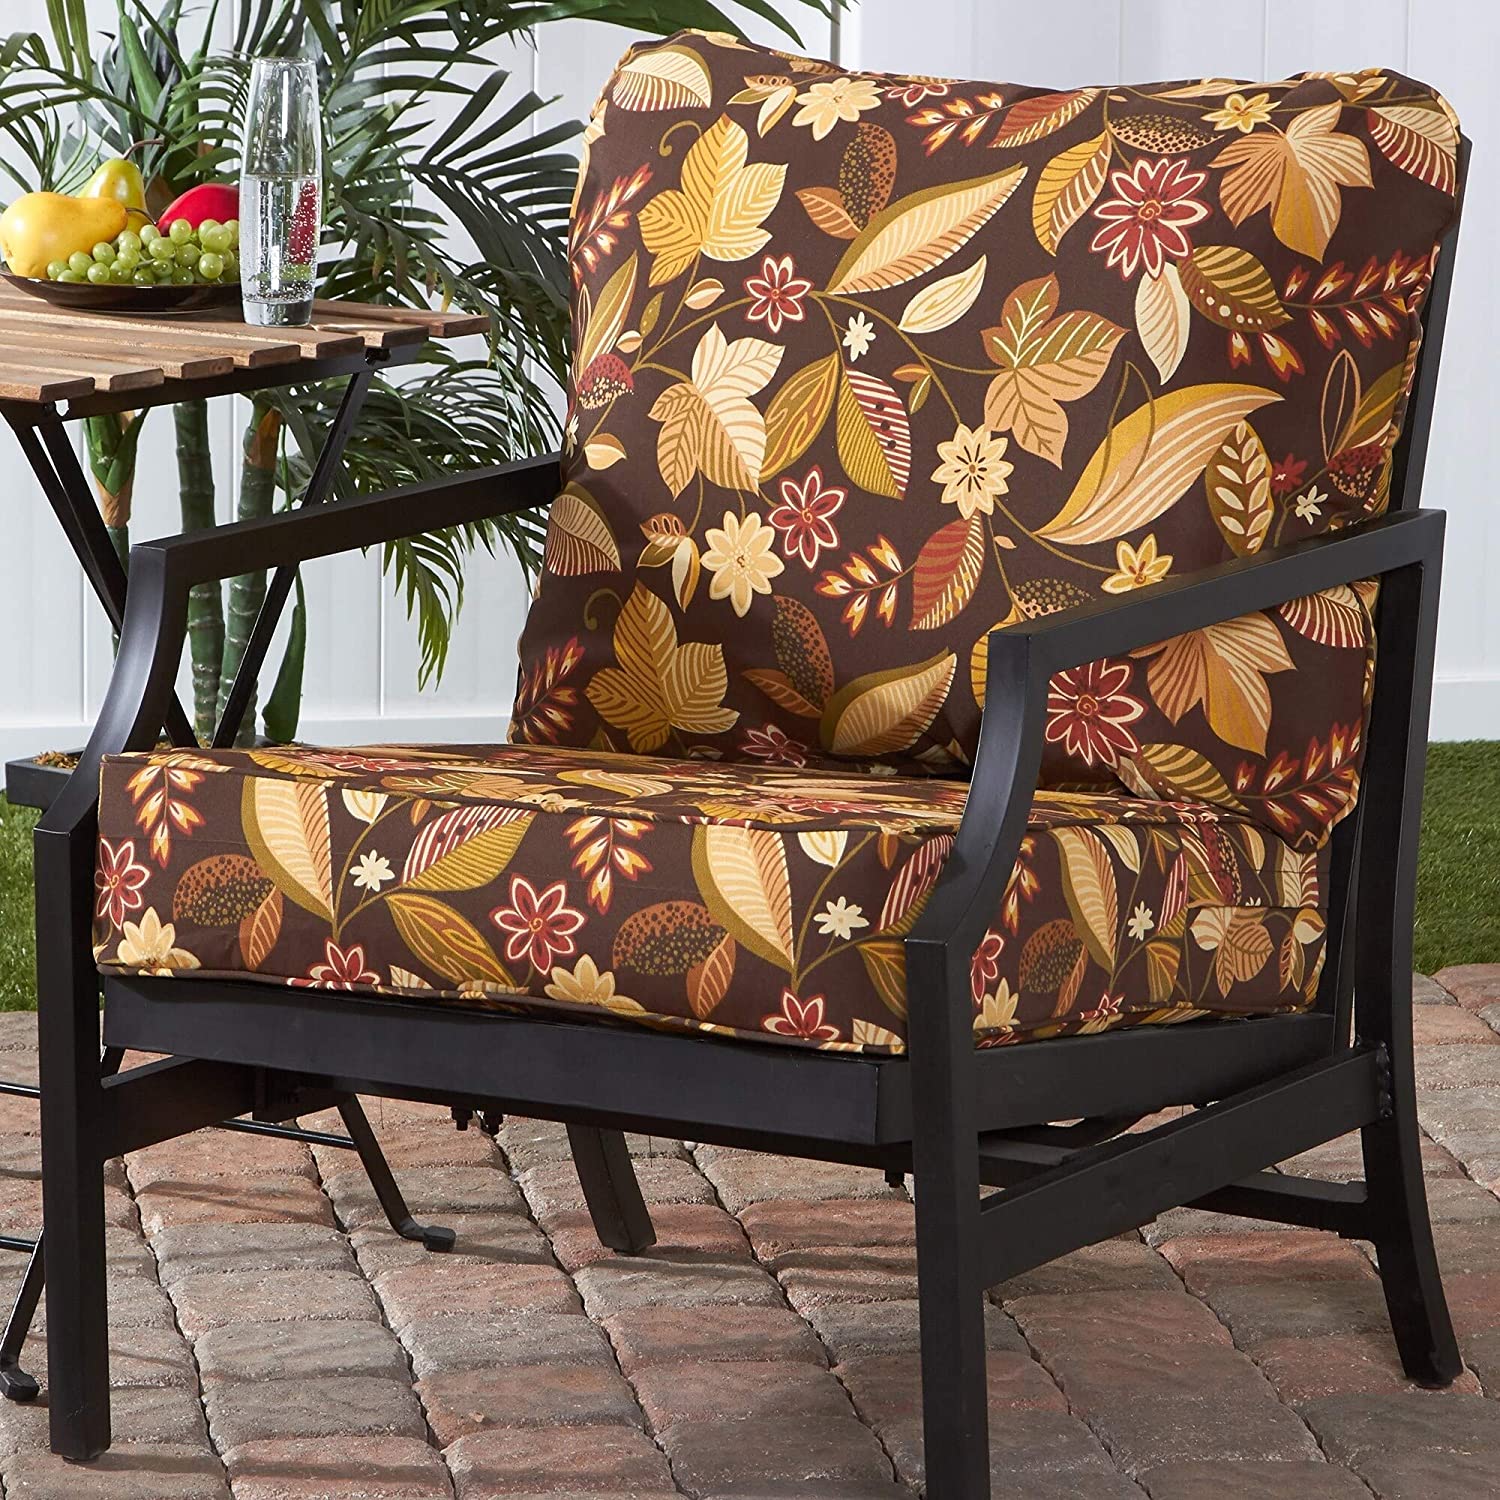 MISC Floral Outdoor 25 inch X 47 inch Deep Seat Cushion Set Brown Polyester Fade Resistant Water